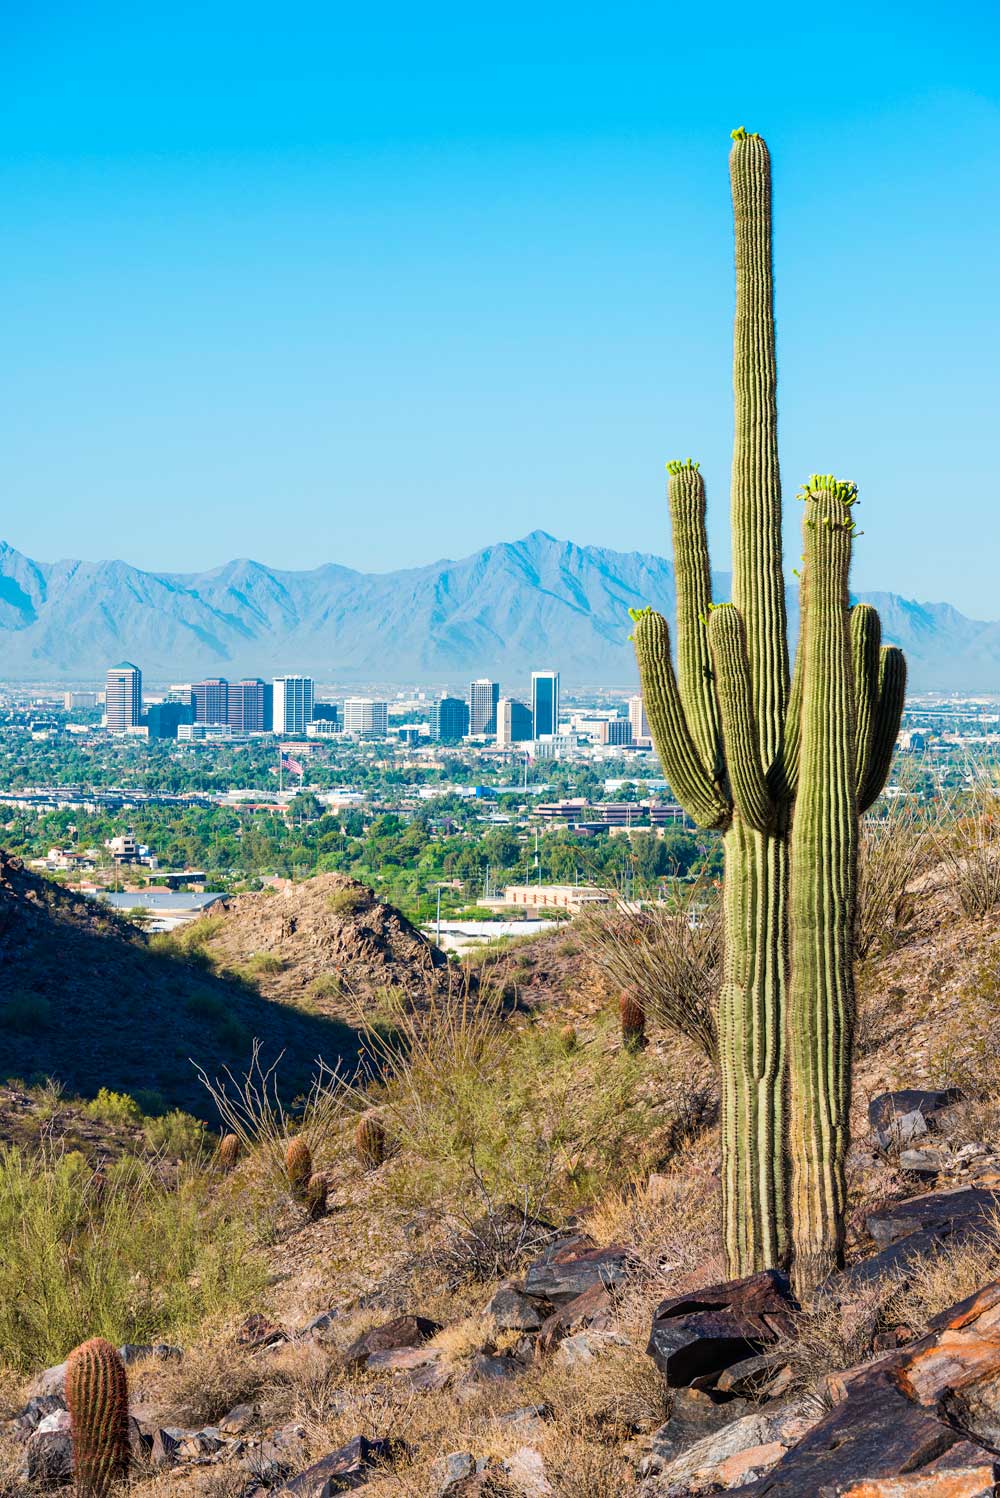 Phoenix Arizona seen from behind a cactus in the desert. This is the home of Scion Phoenix Staffing